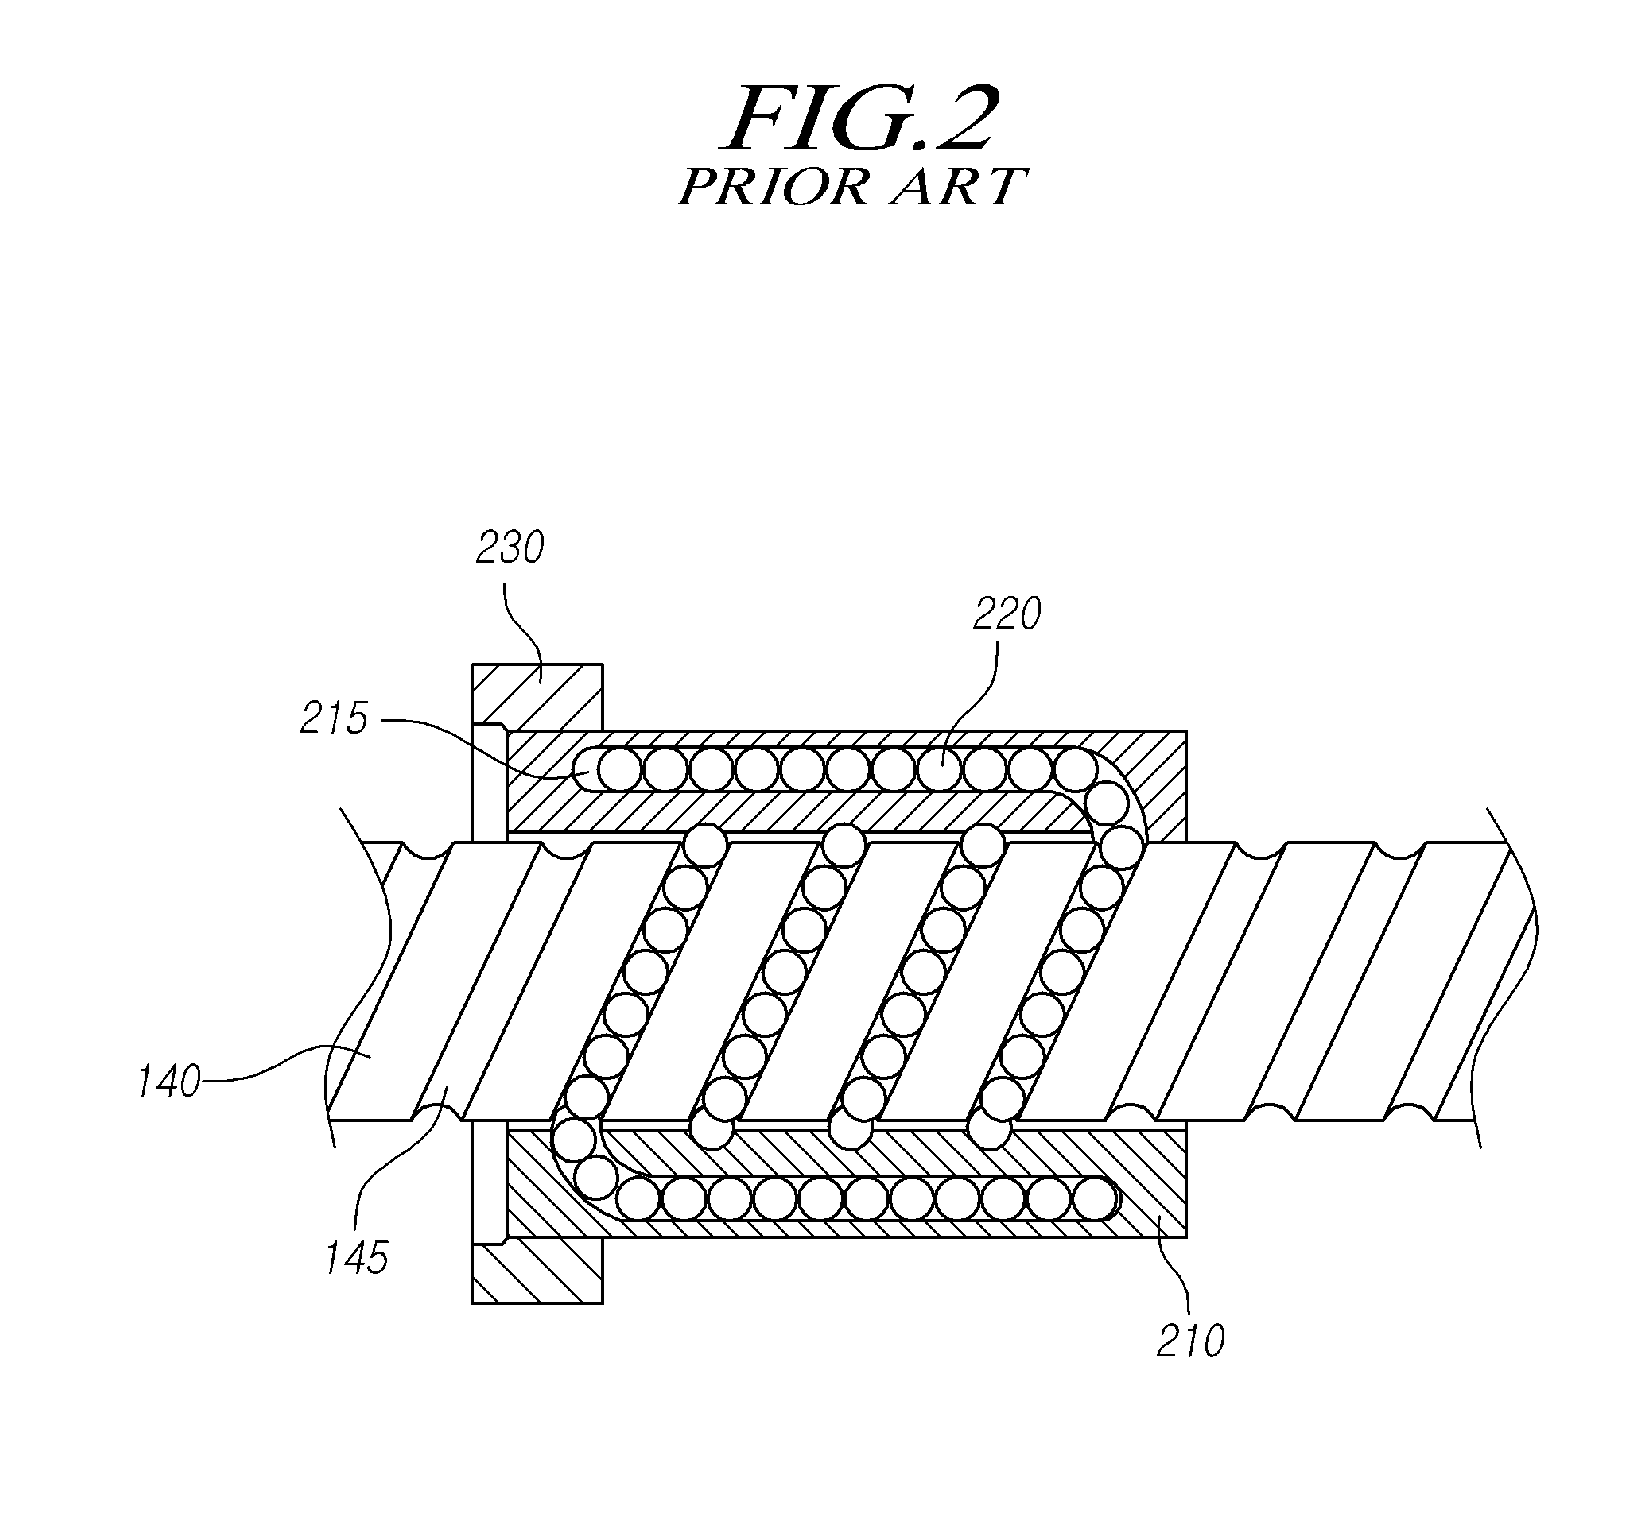 Rack driving-type power assisted steering apparatus